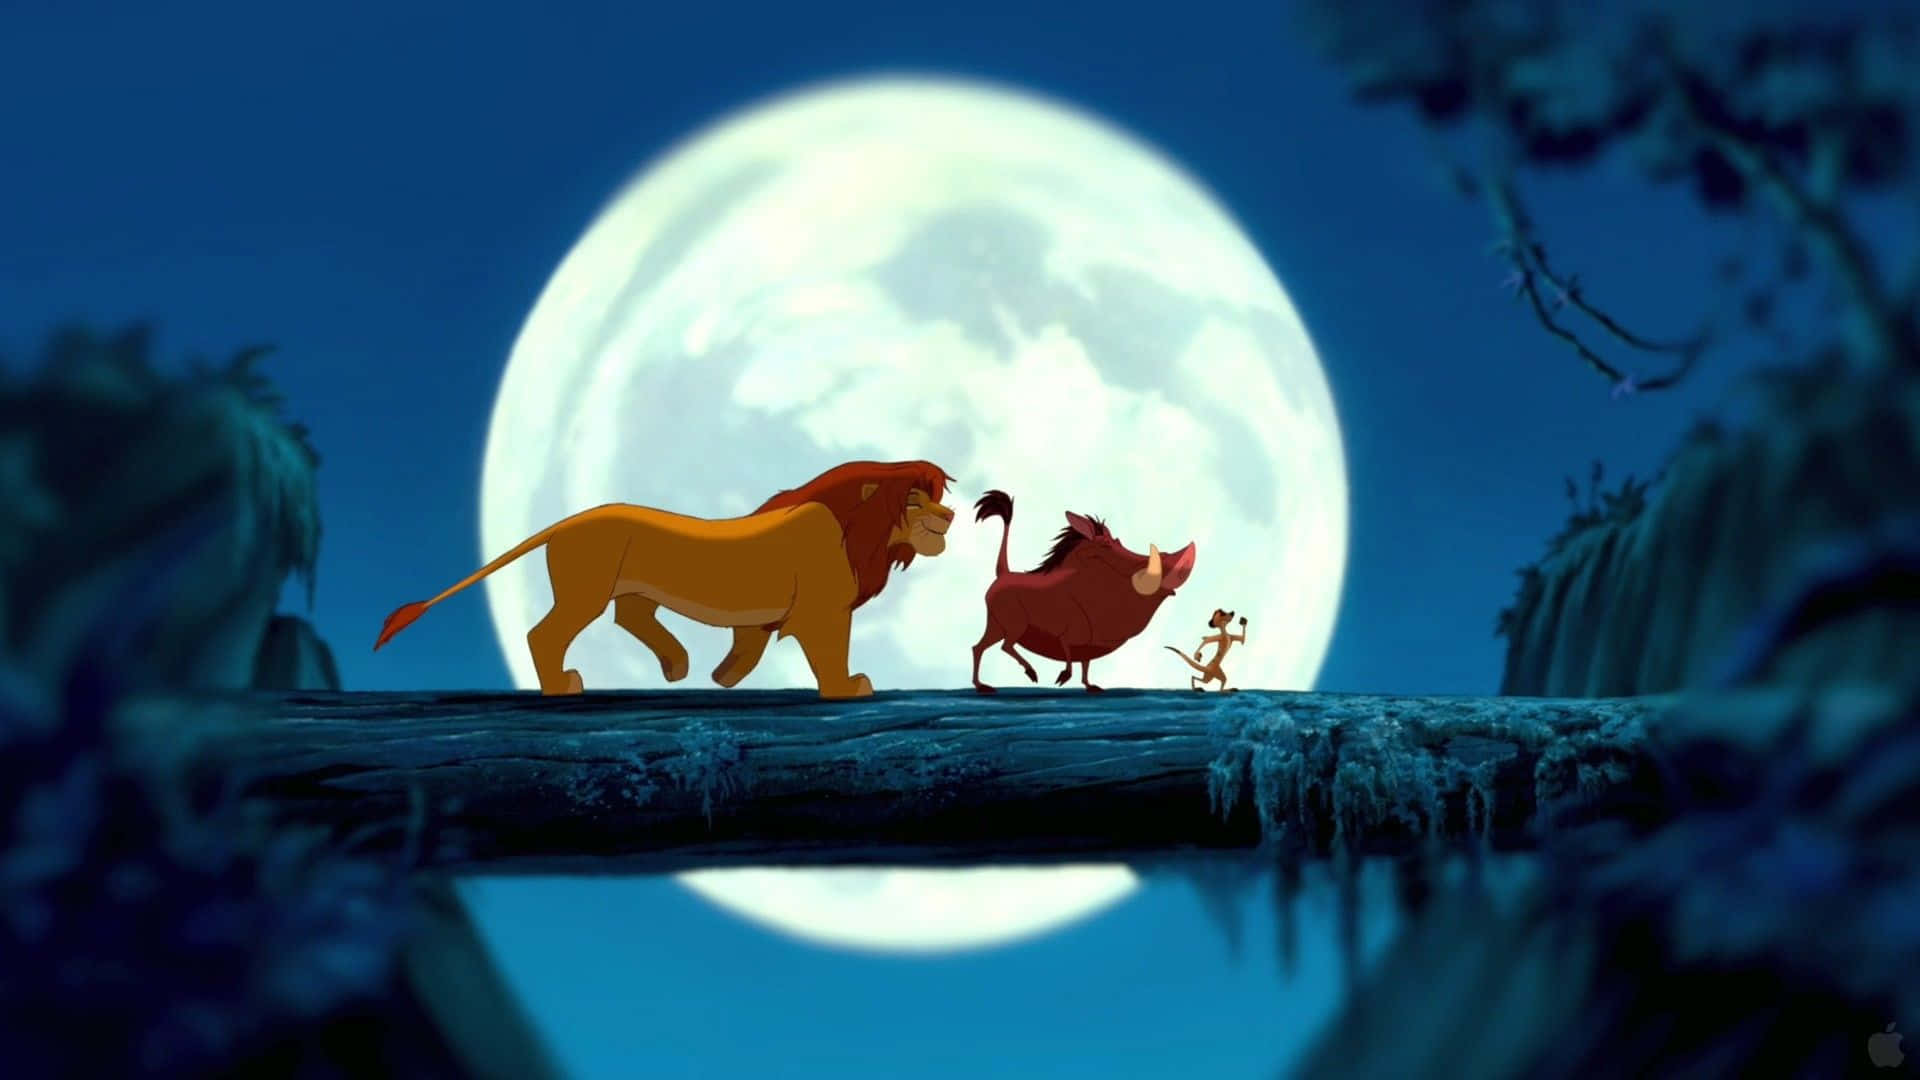 "The Cute Lion King is Here" Wallpaper